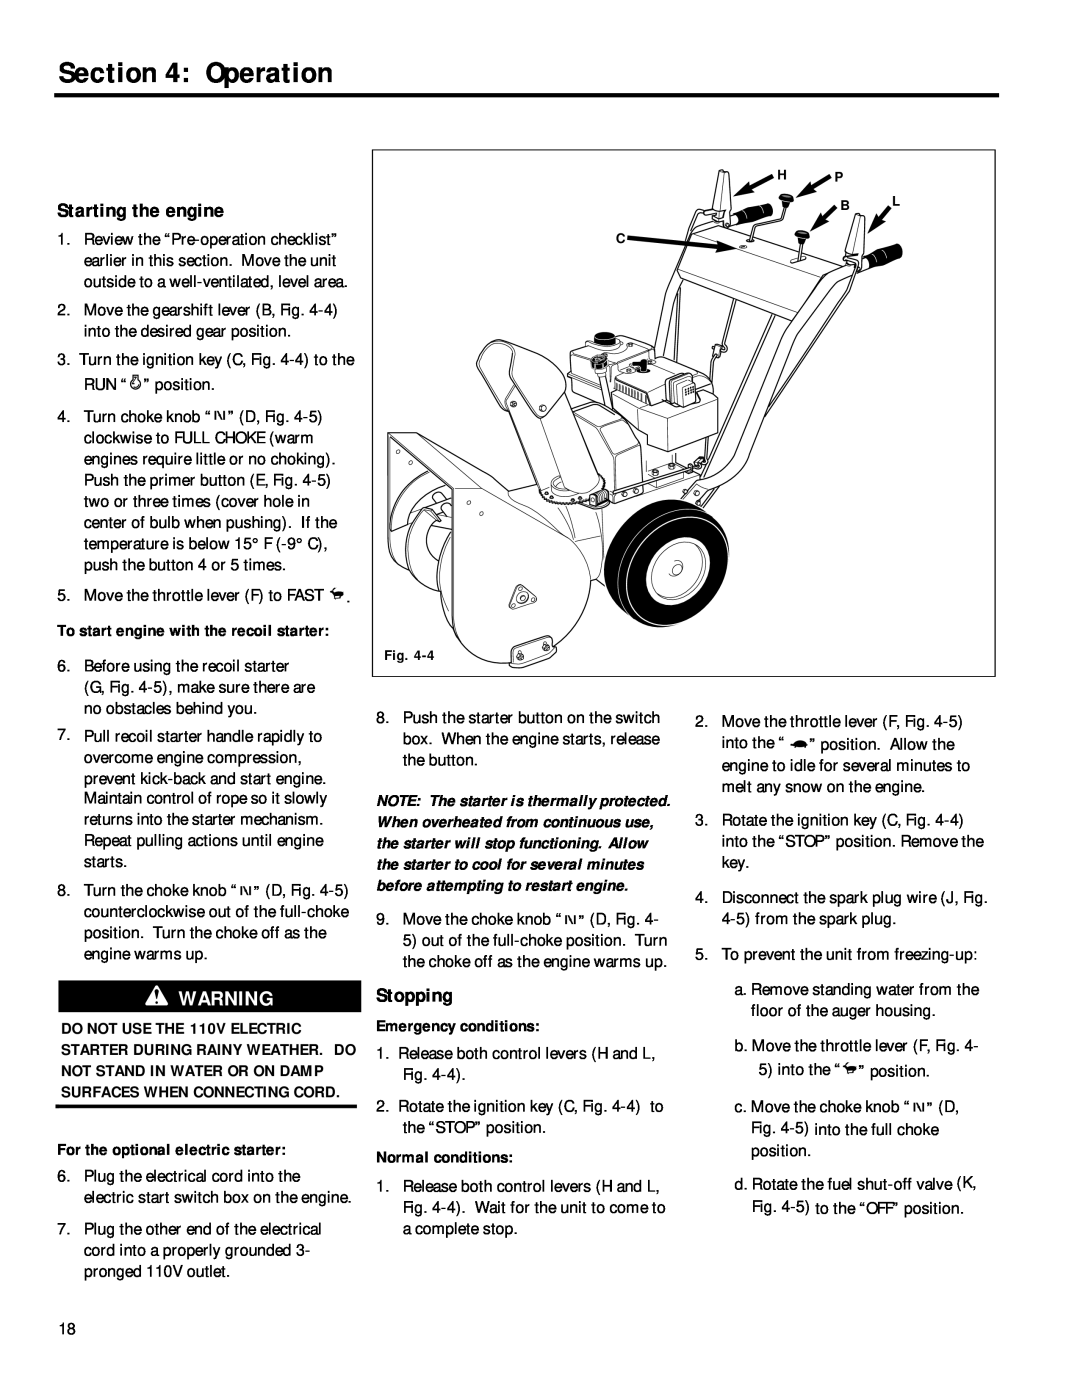 Troy-Bilt 42010 Starting the engine, Stopping, Operation, To start engine with the recoil starter, Emergency conditions 